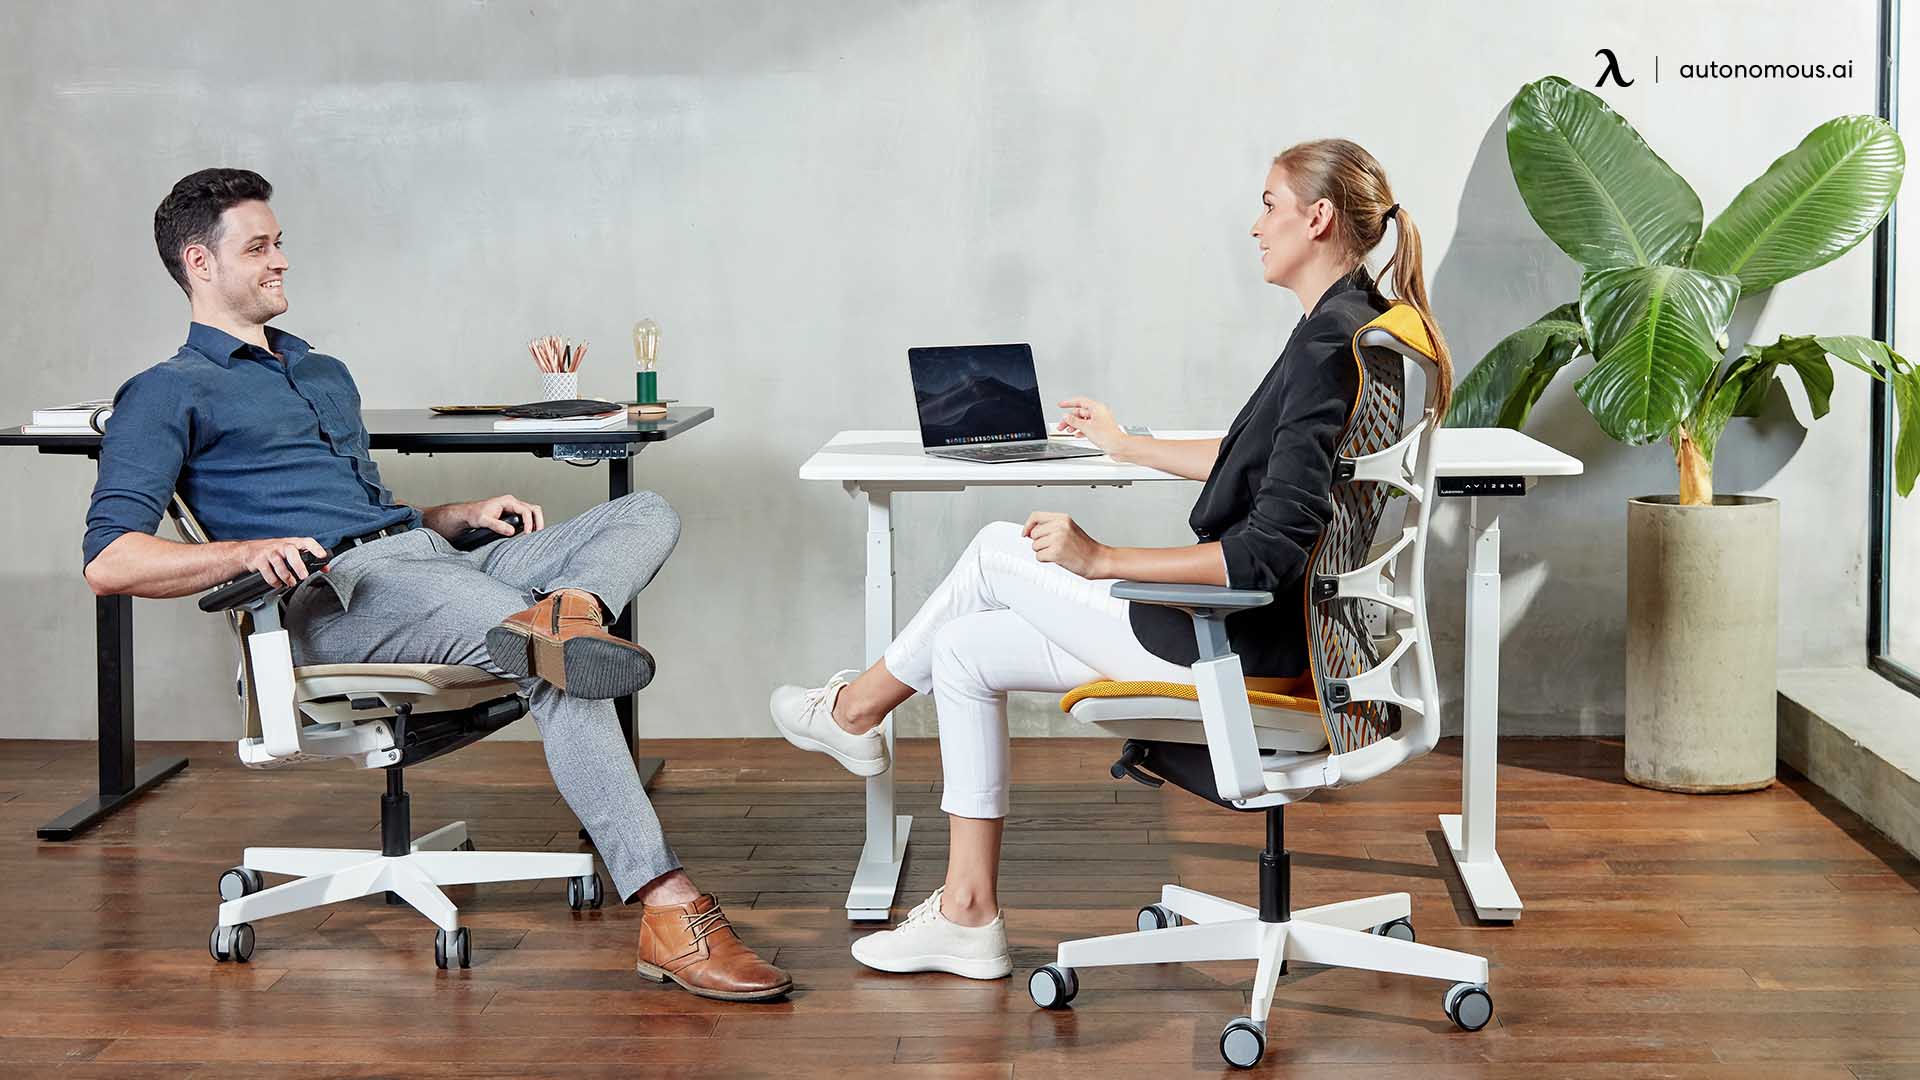 10 Things to Consider When Buying an Ergonomic Chair